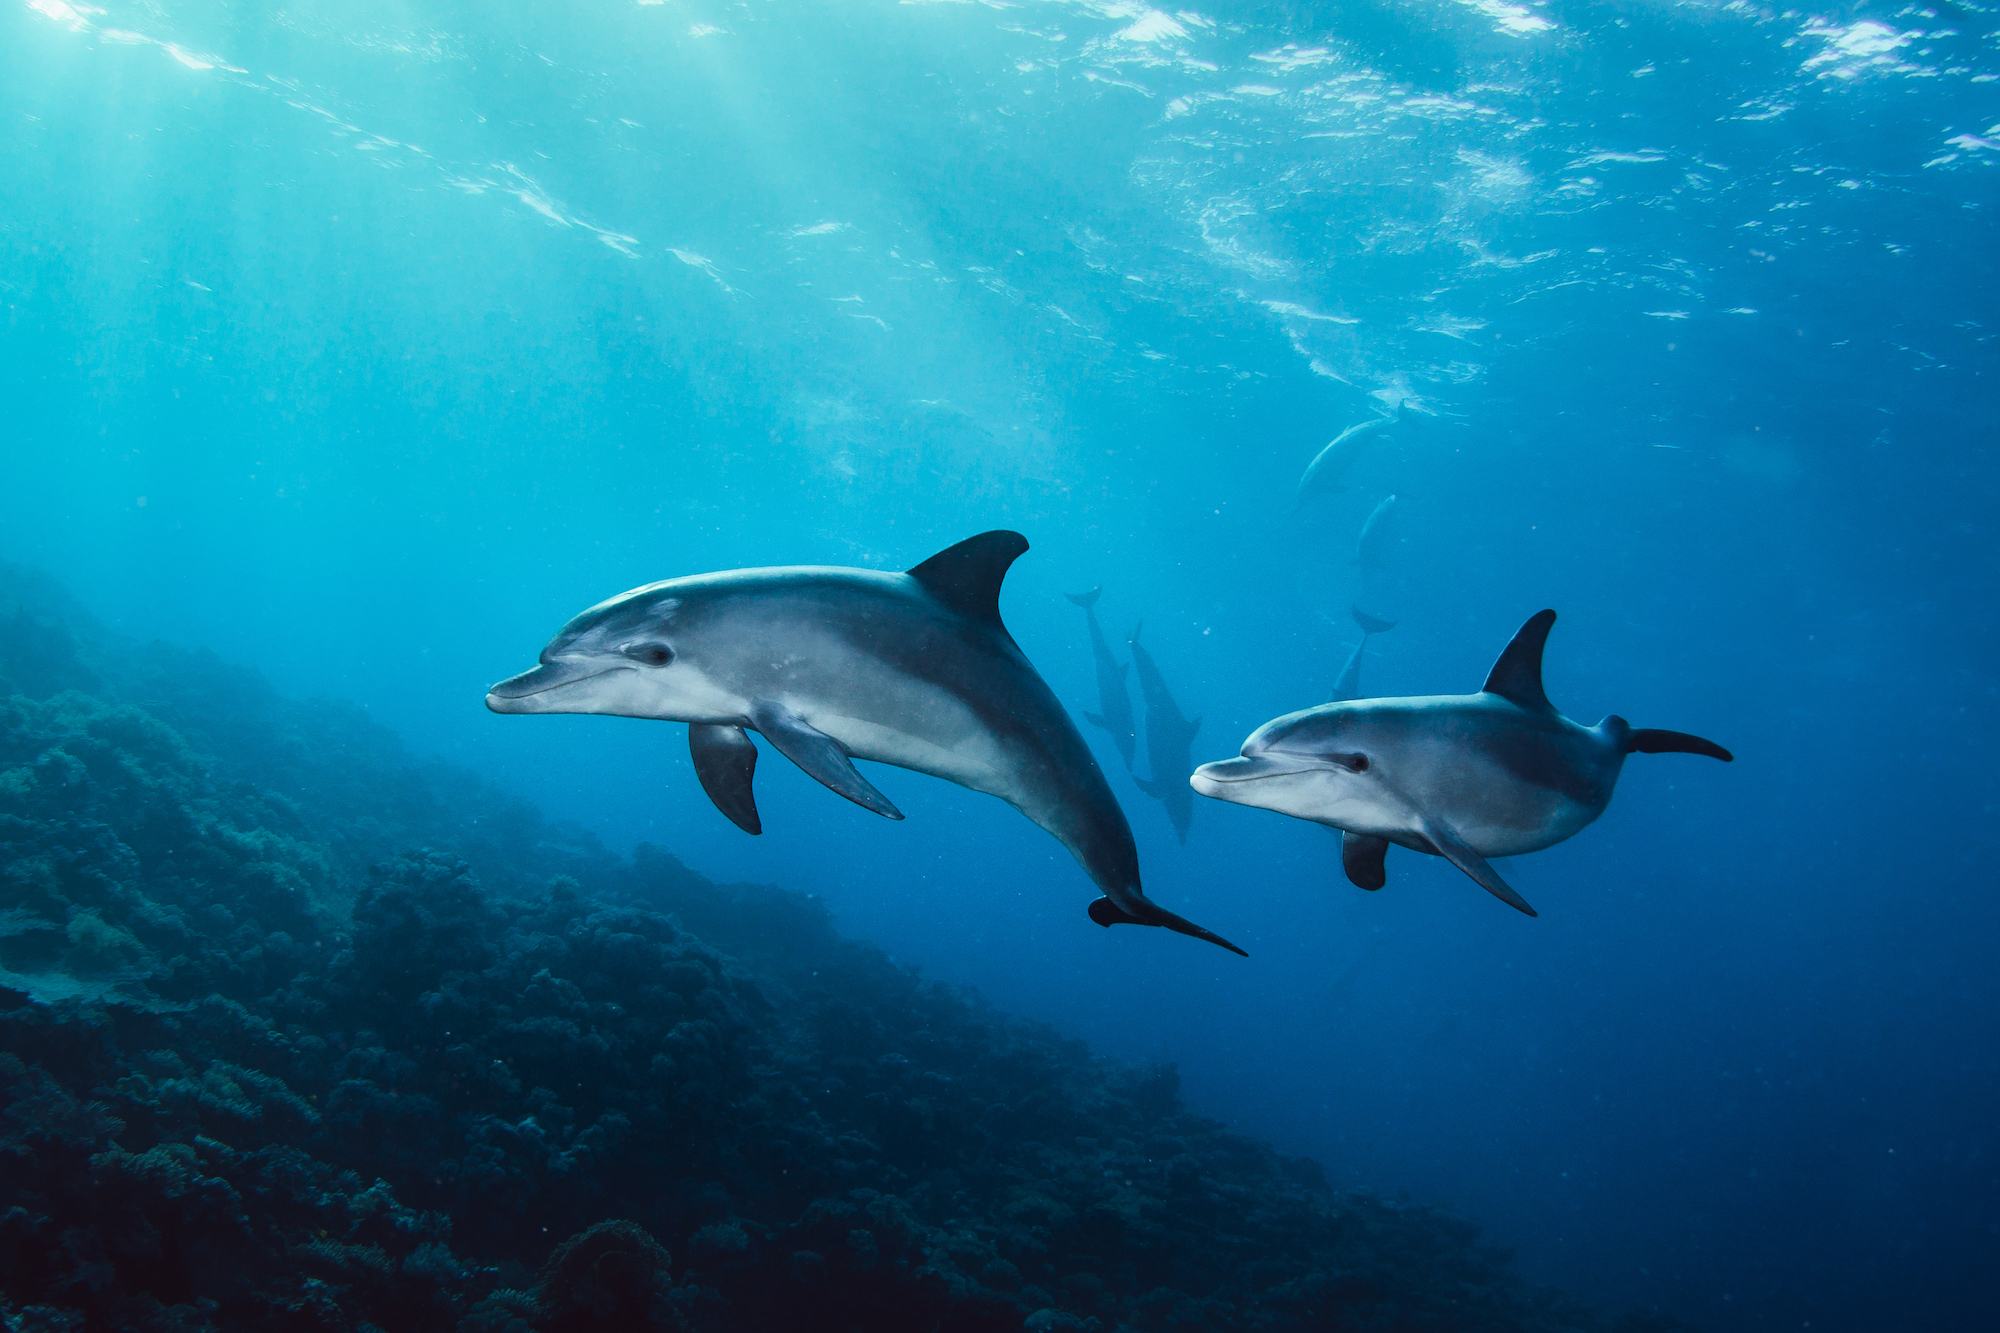 Dolphins are some of the most incredible and loved ocean animals in the world.